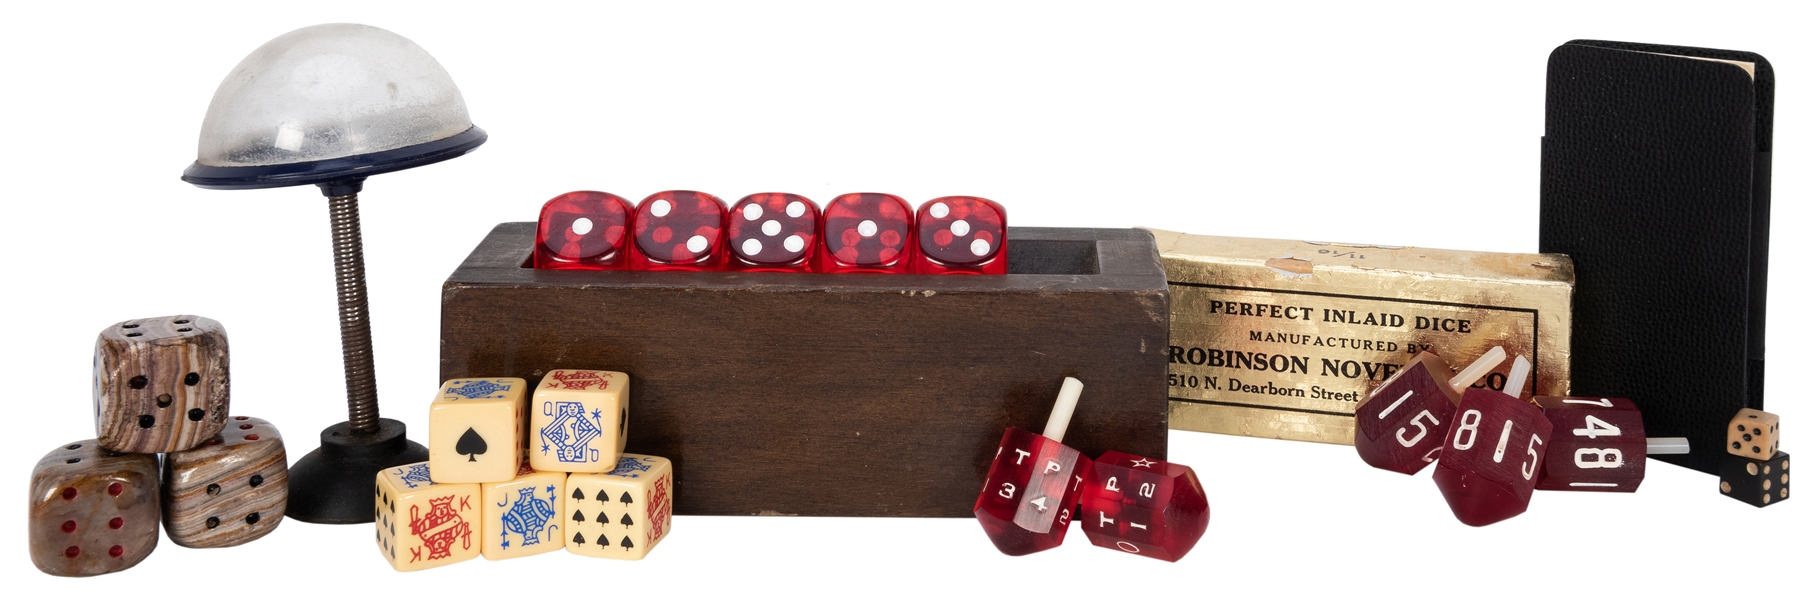 Collection of Novelty Dice and Rolling Logs.